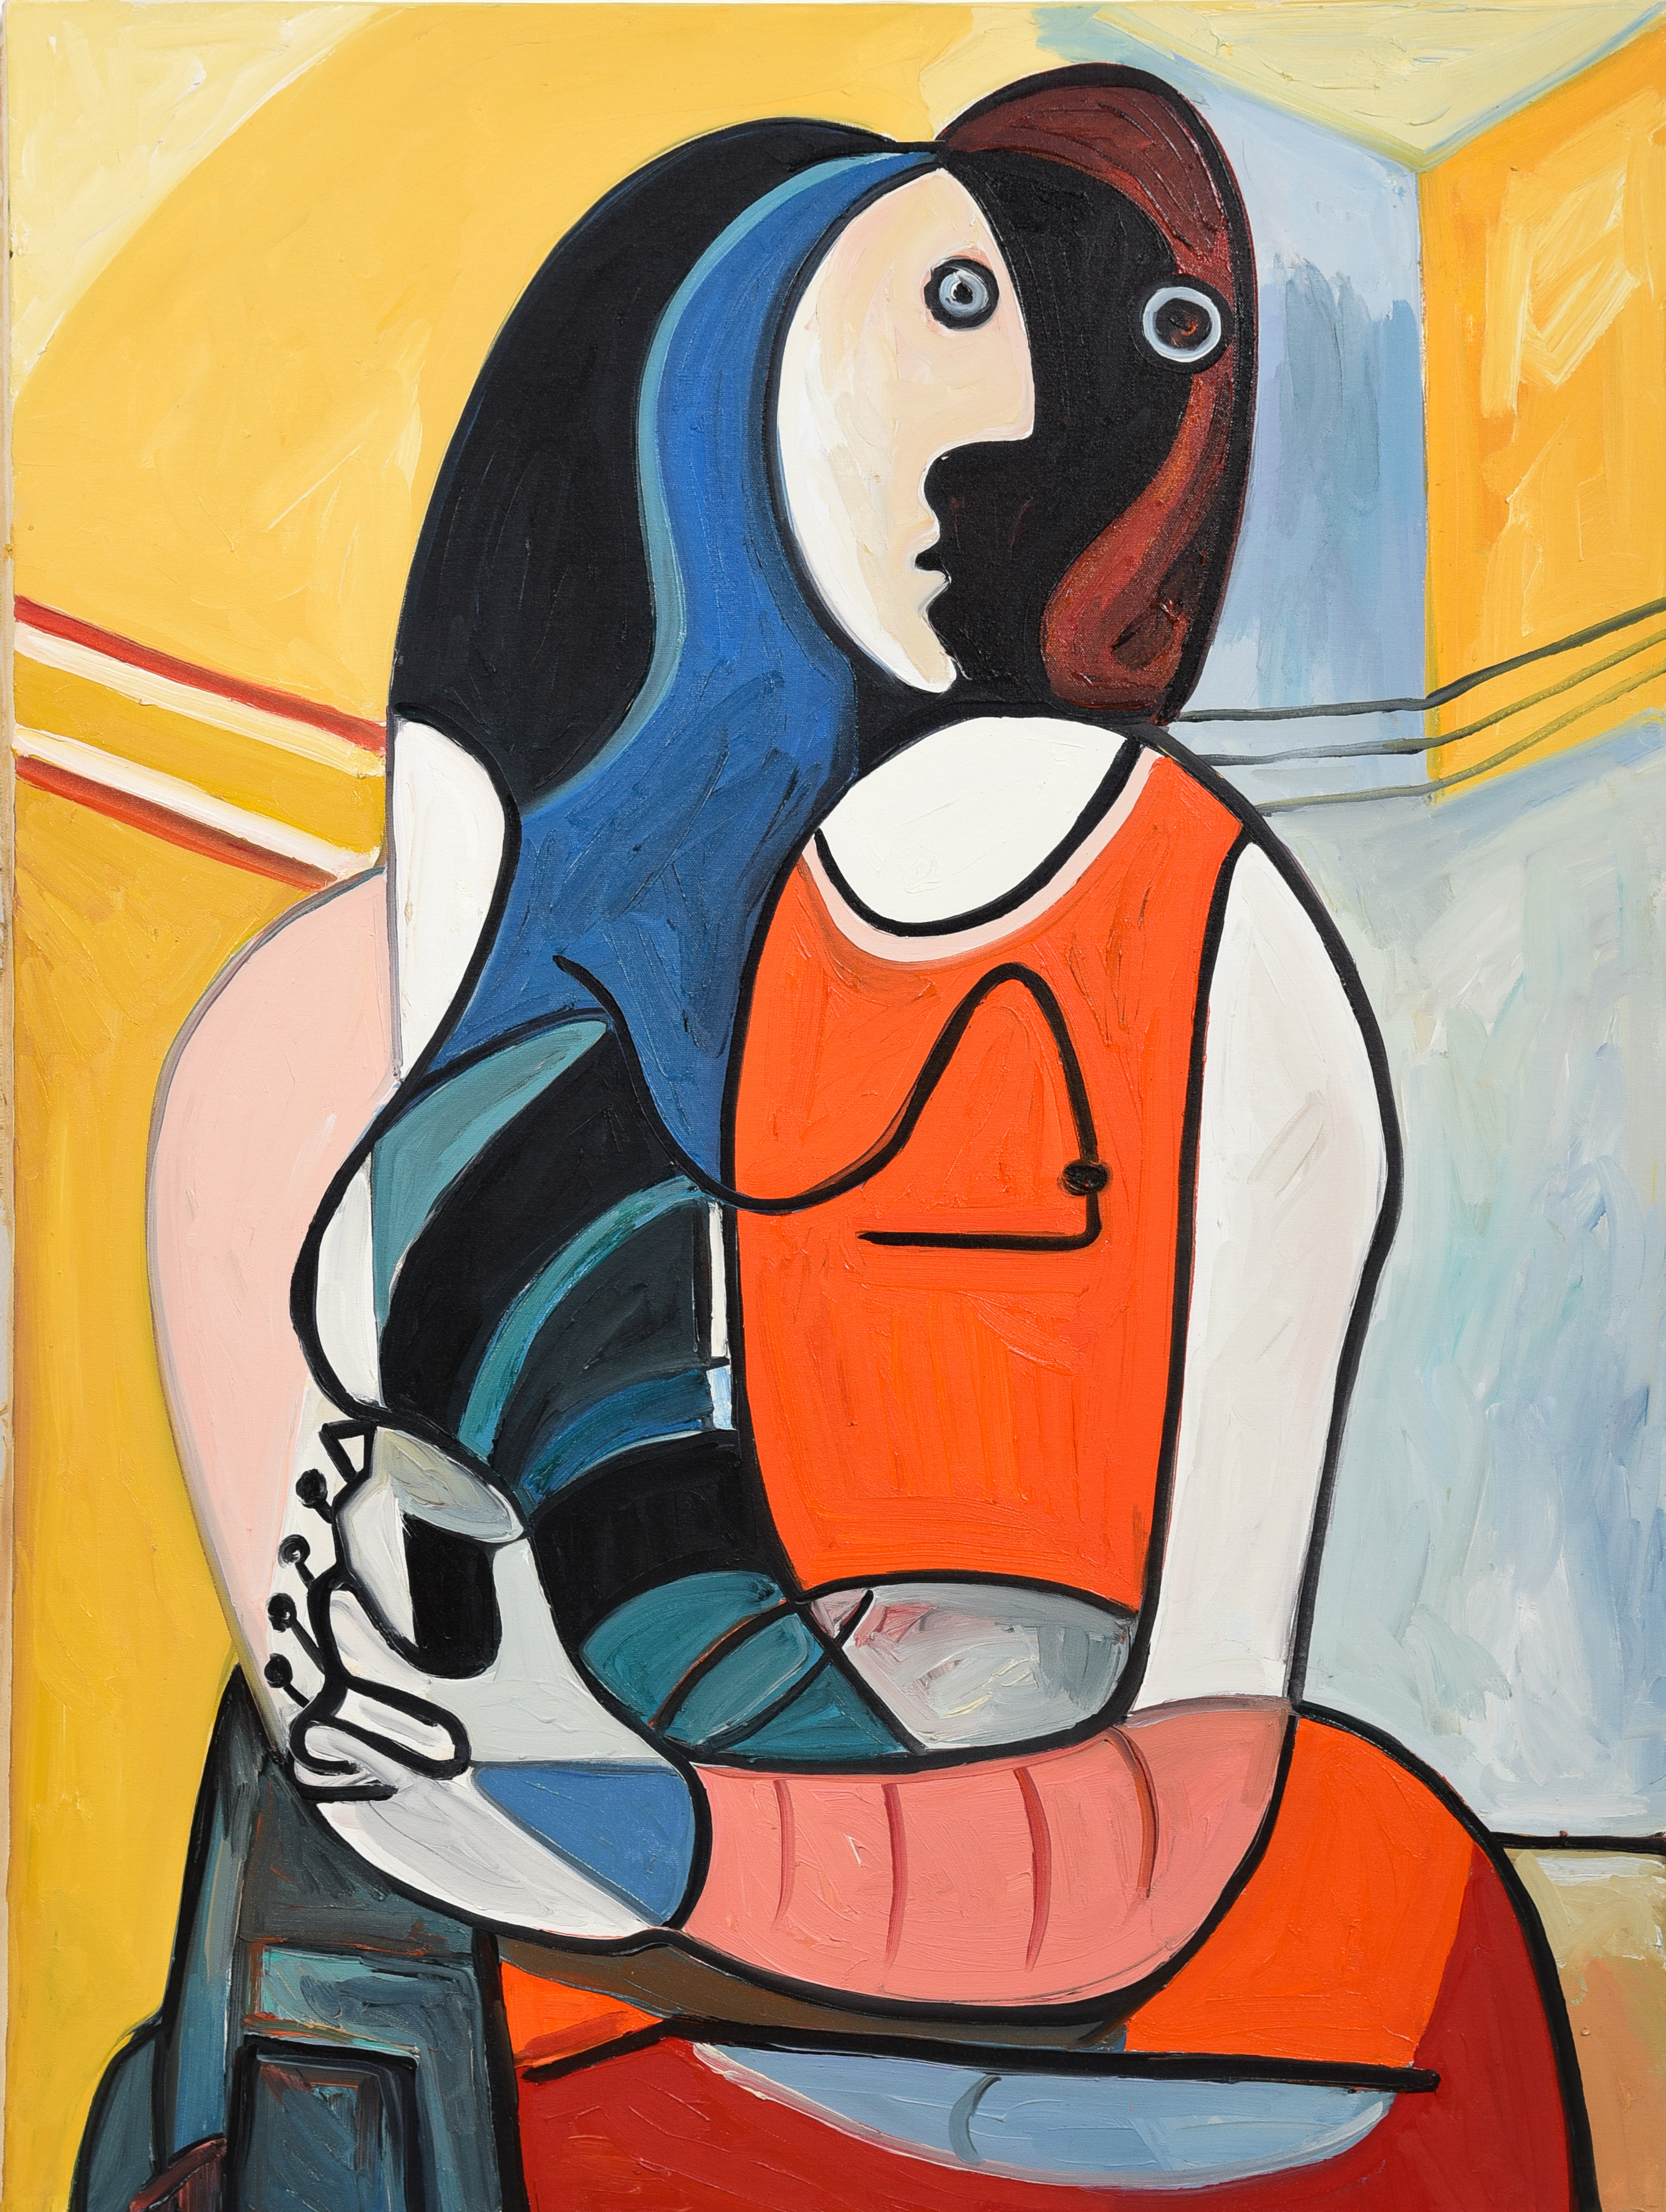 After Picasso "Seated Woman", oil